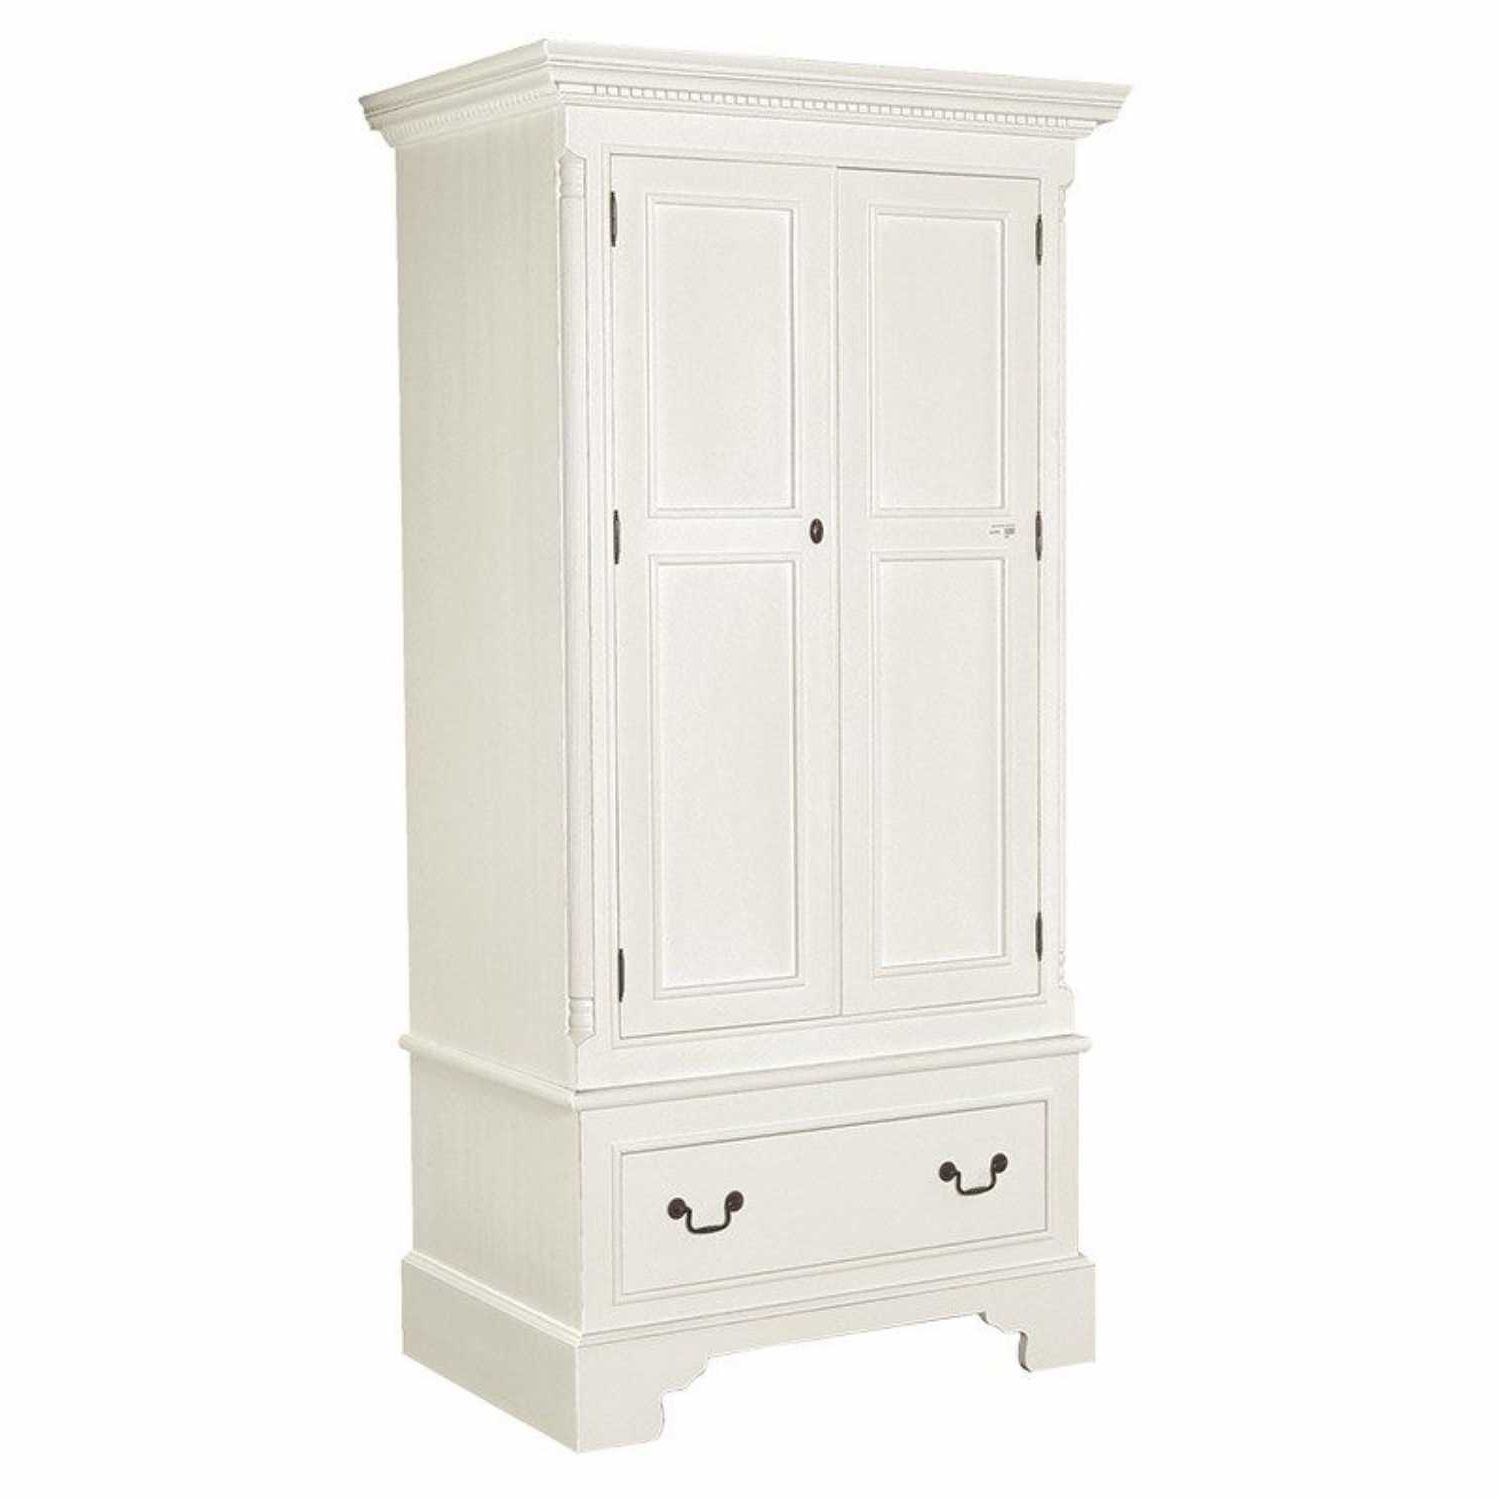 Georgian Shabby Chic White Painted Small Double Wardrobe With Drawer Inside Latest White Shabby Chic Wardrobes (View 10 of 15)